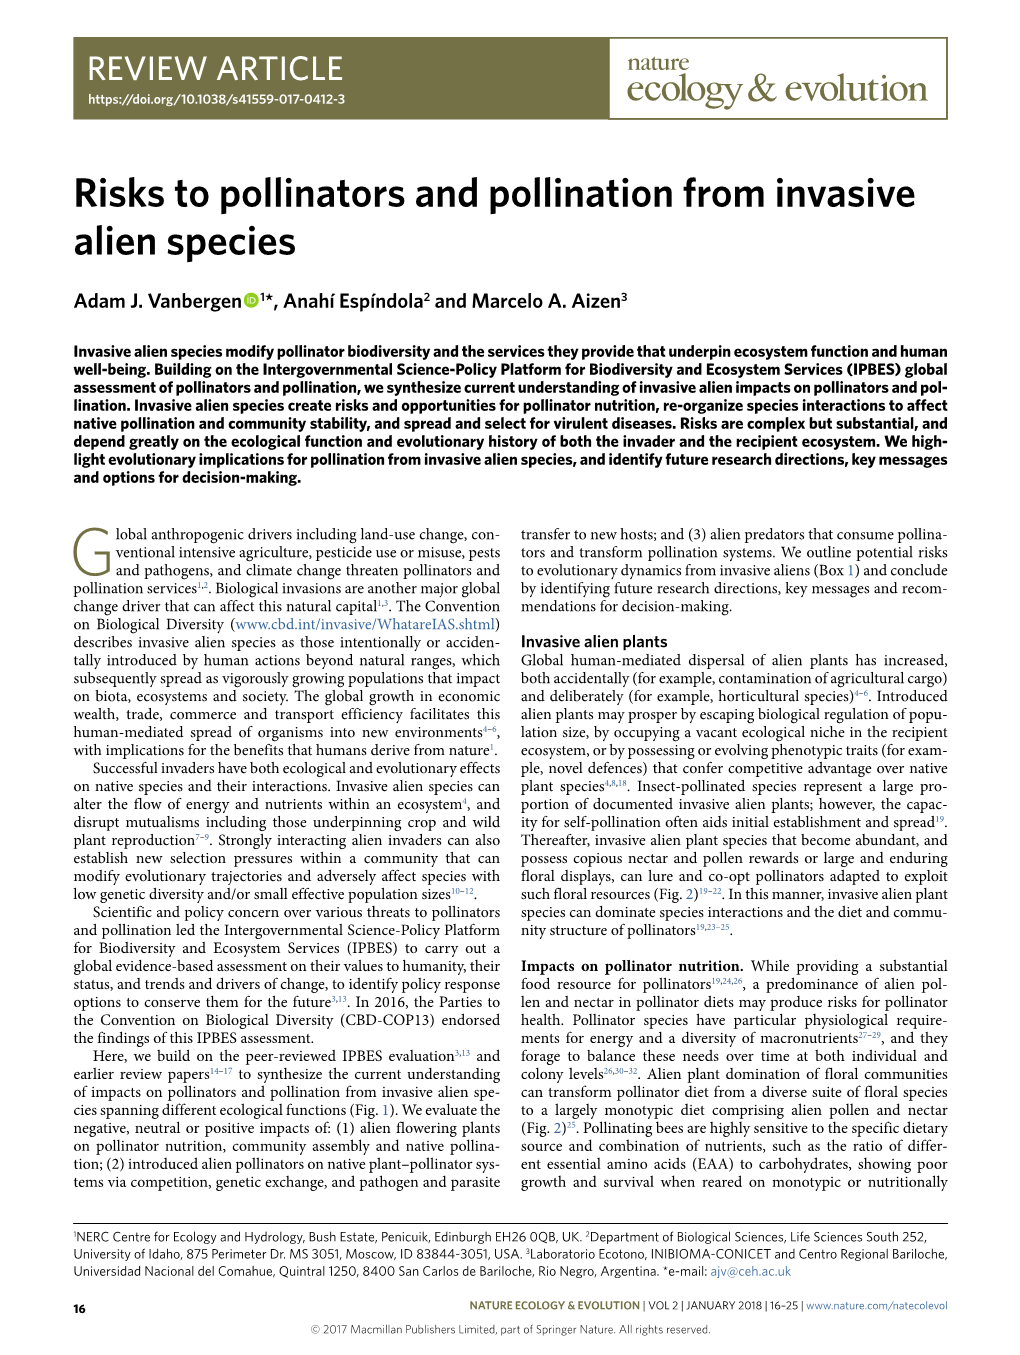 Risks to Pollinators and Pollination from Invasive Alien Species